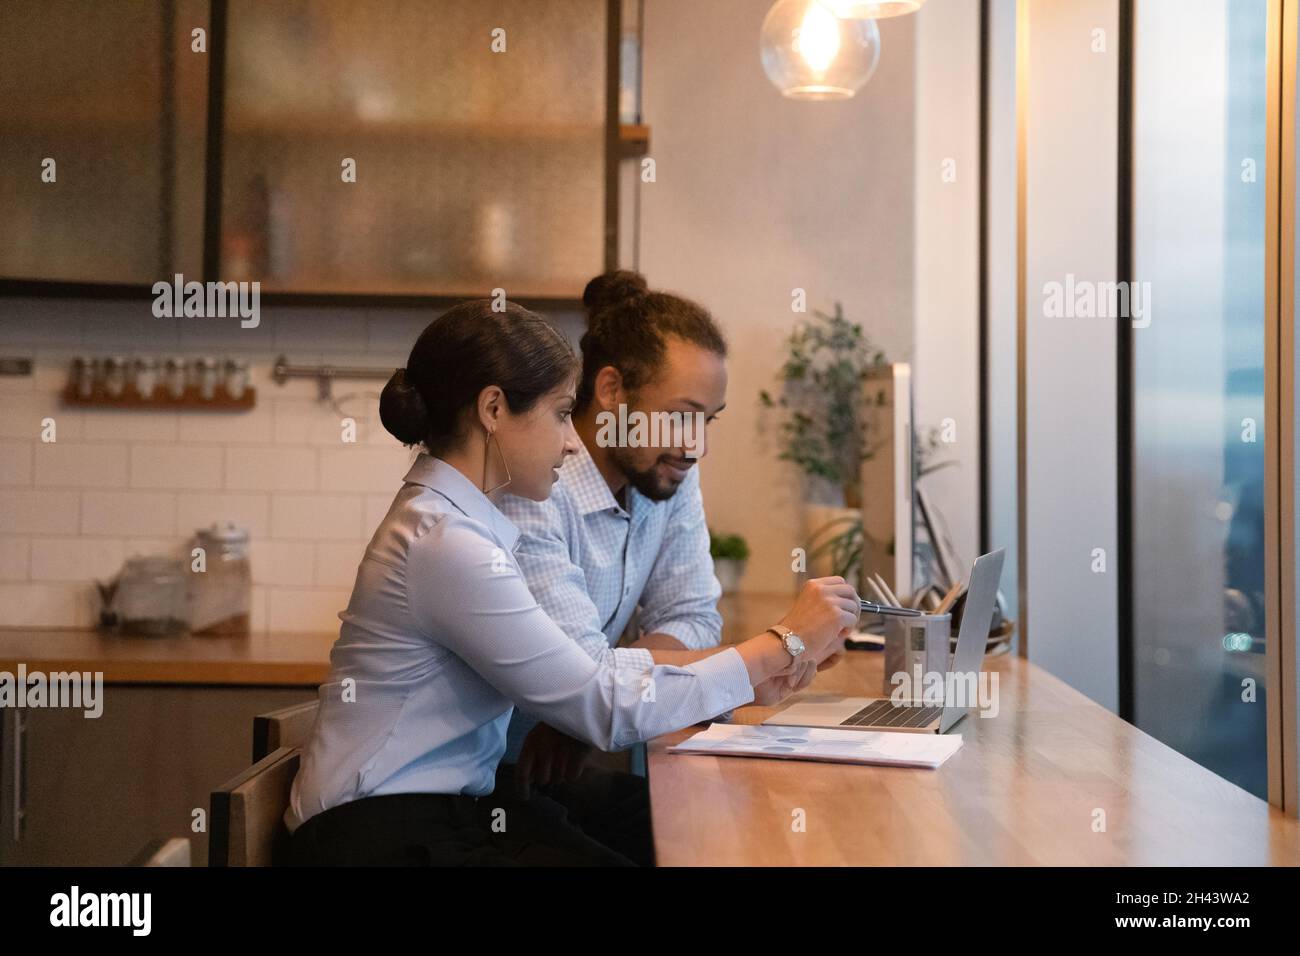 Concentrated mixed race employees working on computer. Stock Photo